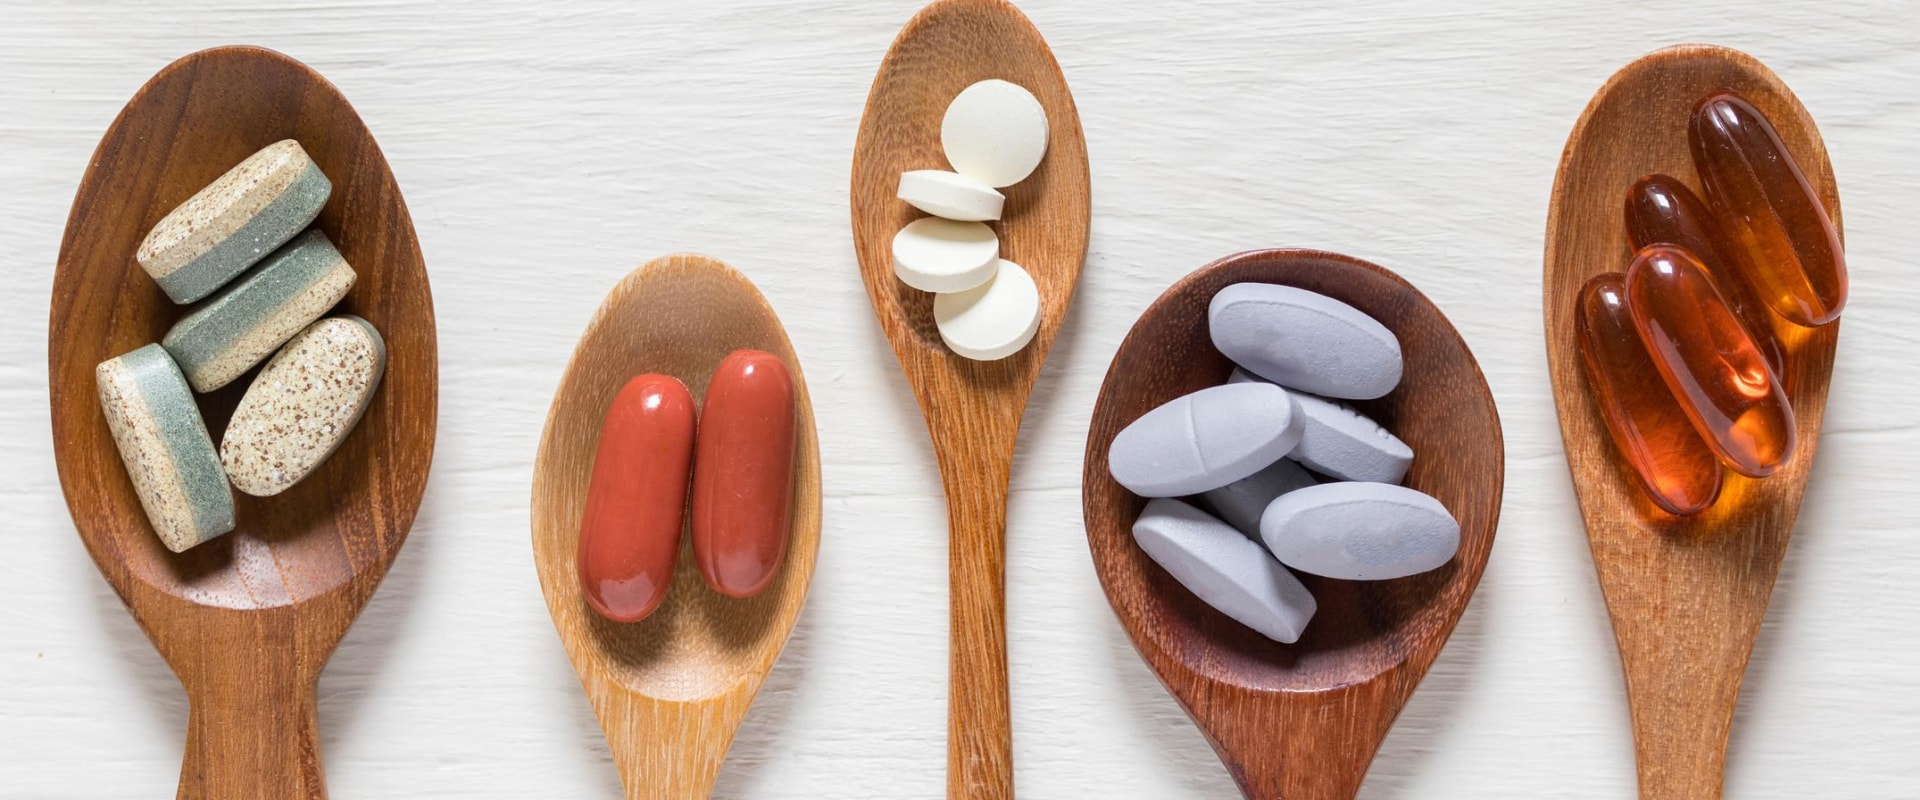 Why Dietary Supplements are Not Regulated by the FDA: An Expert's Perspective